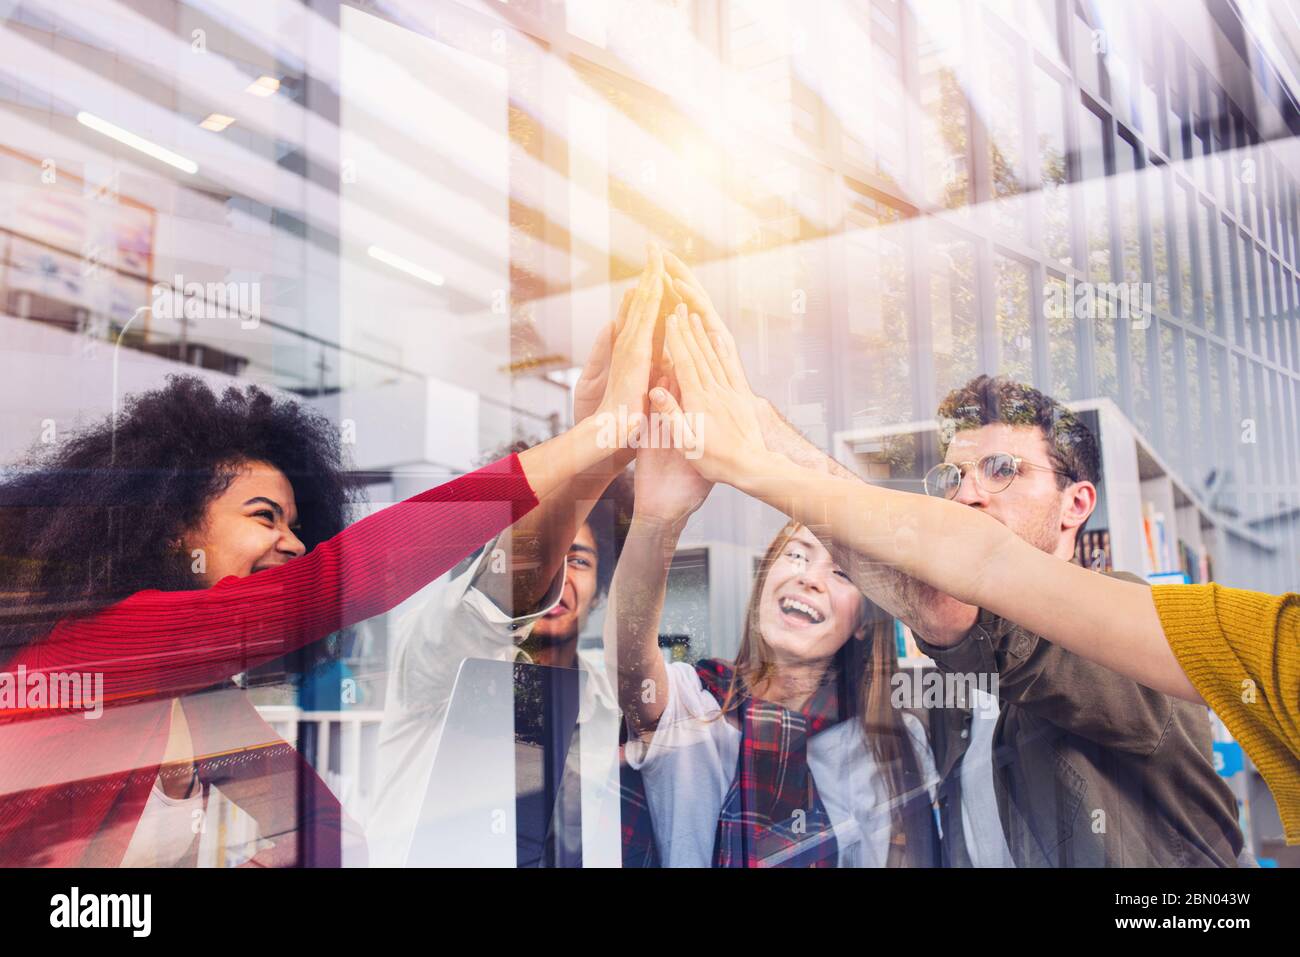 Business people putting their hands together. Concept of teamwork and partnership Stock Photo